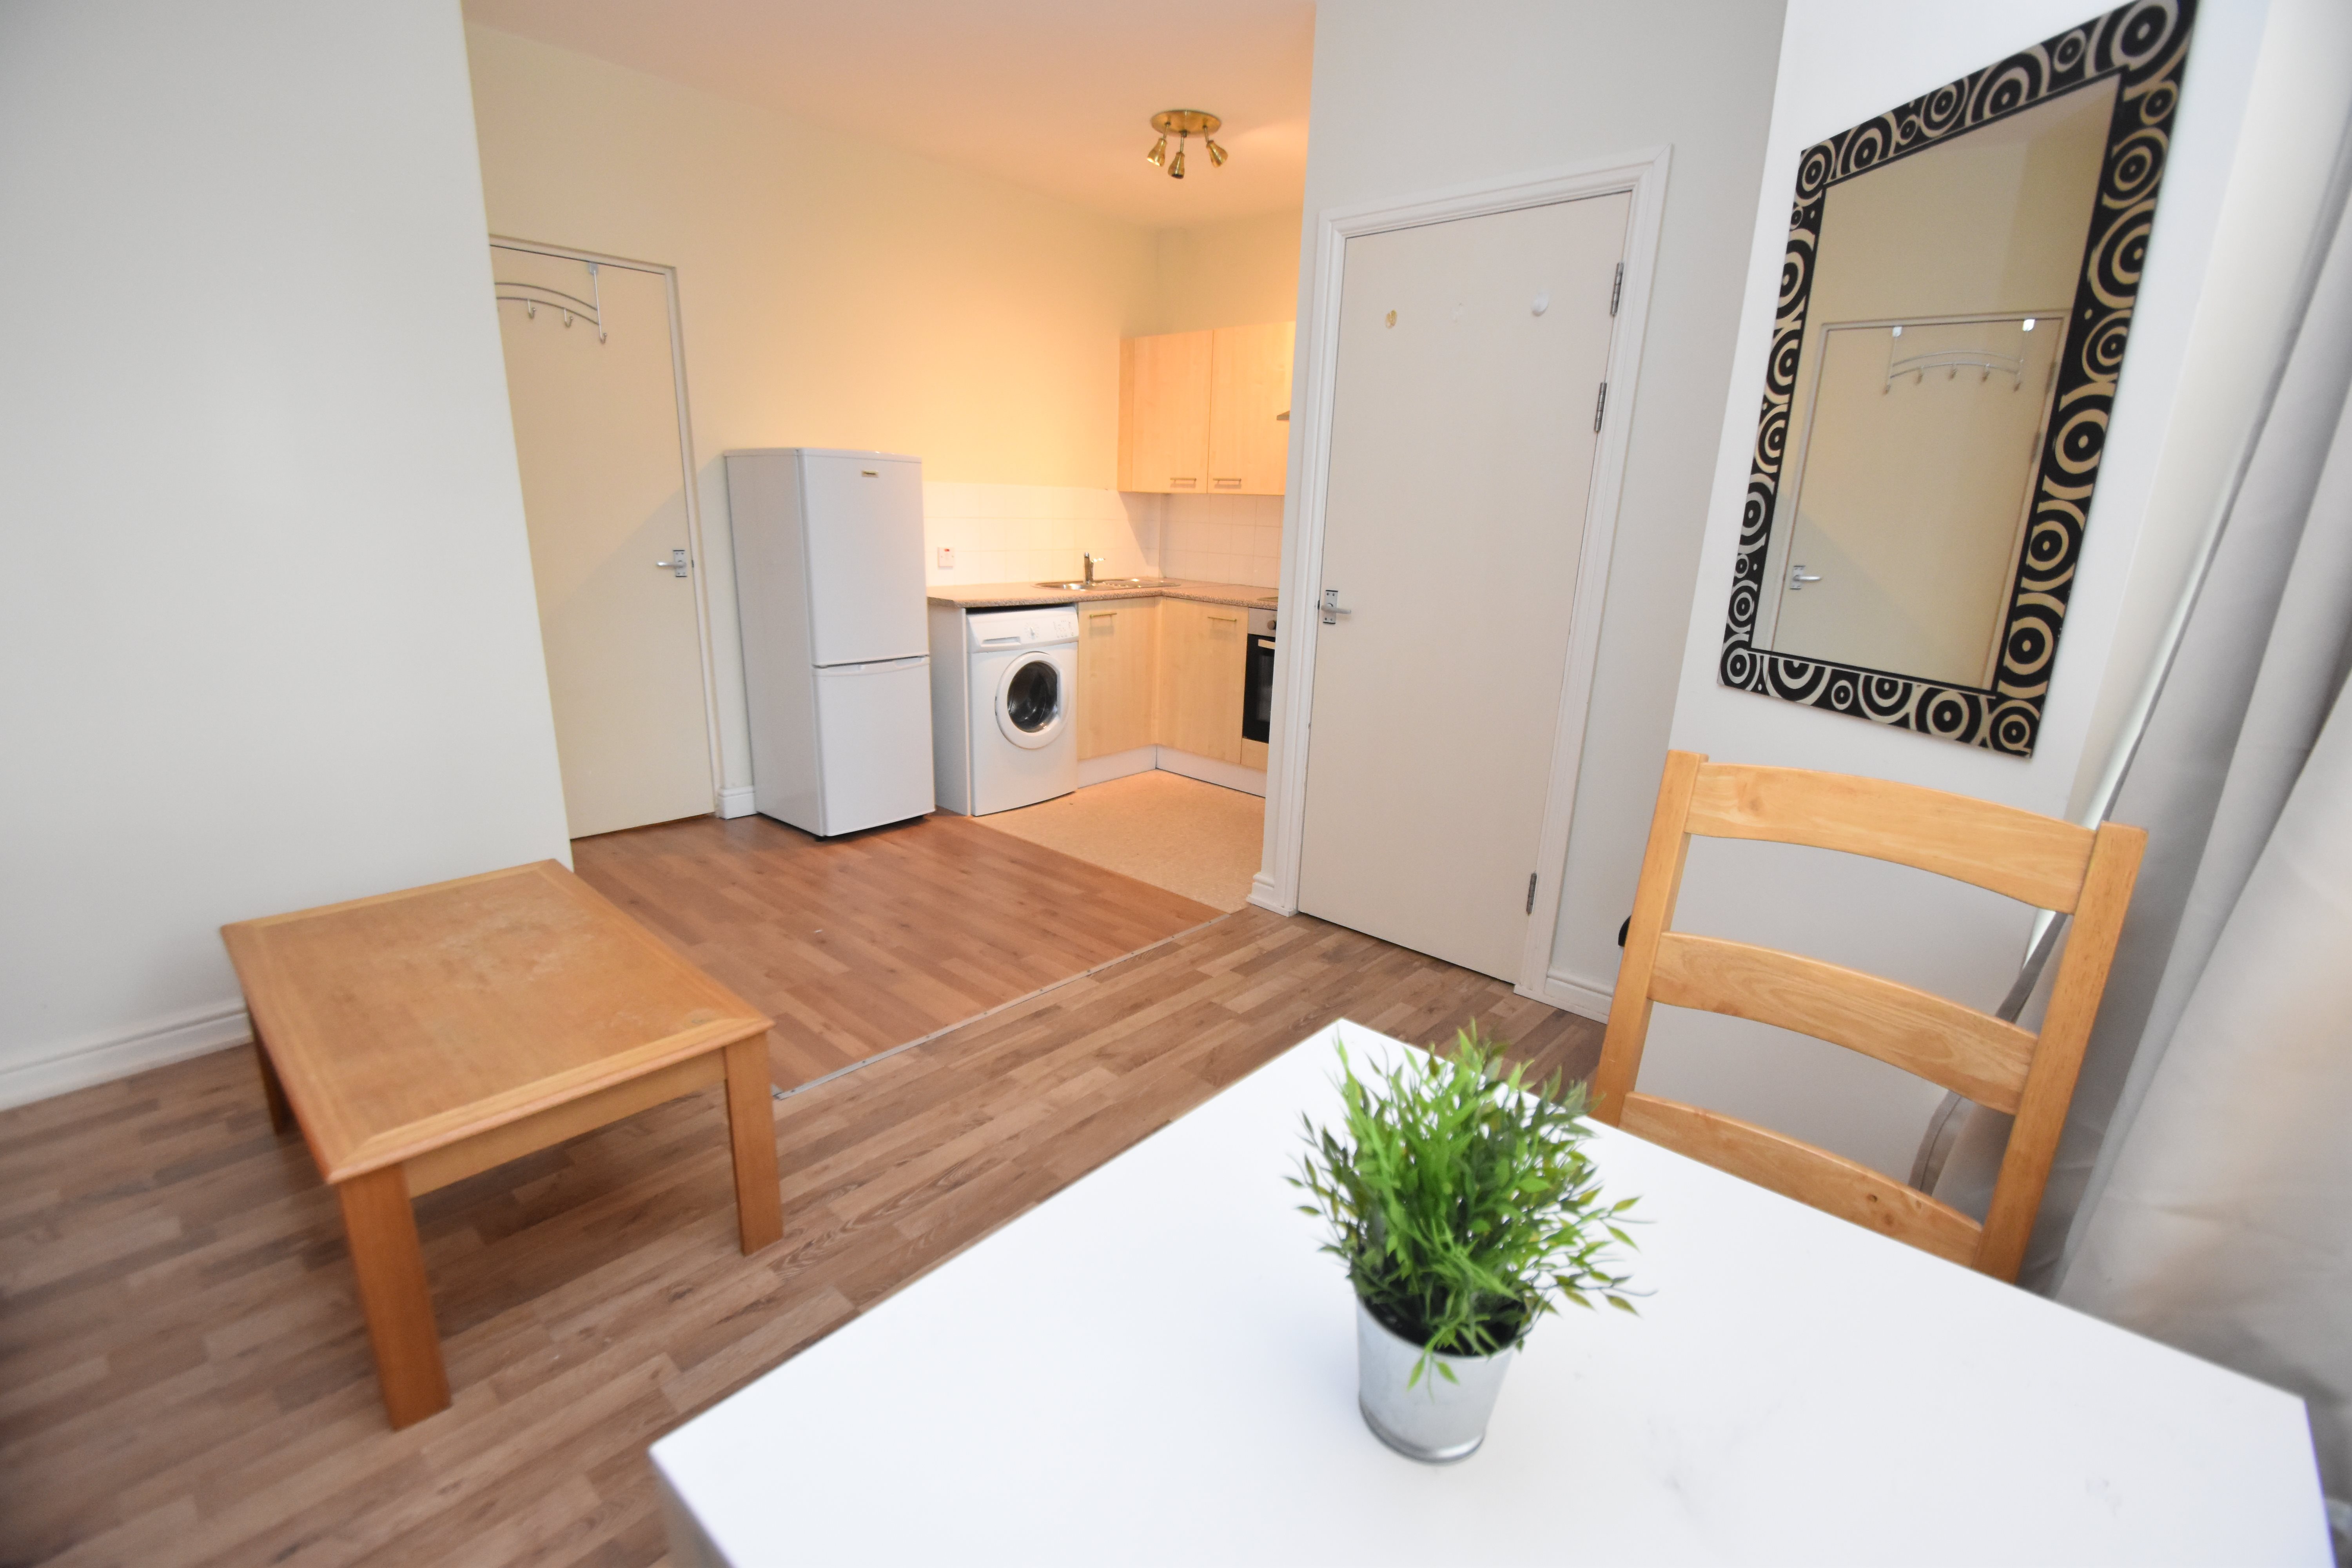 1 bed flat to rent in Piercefield Place, ADAMSDOWN - Property Image 1